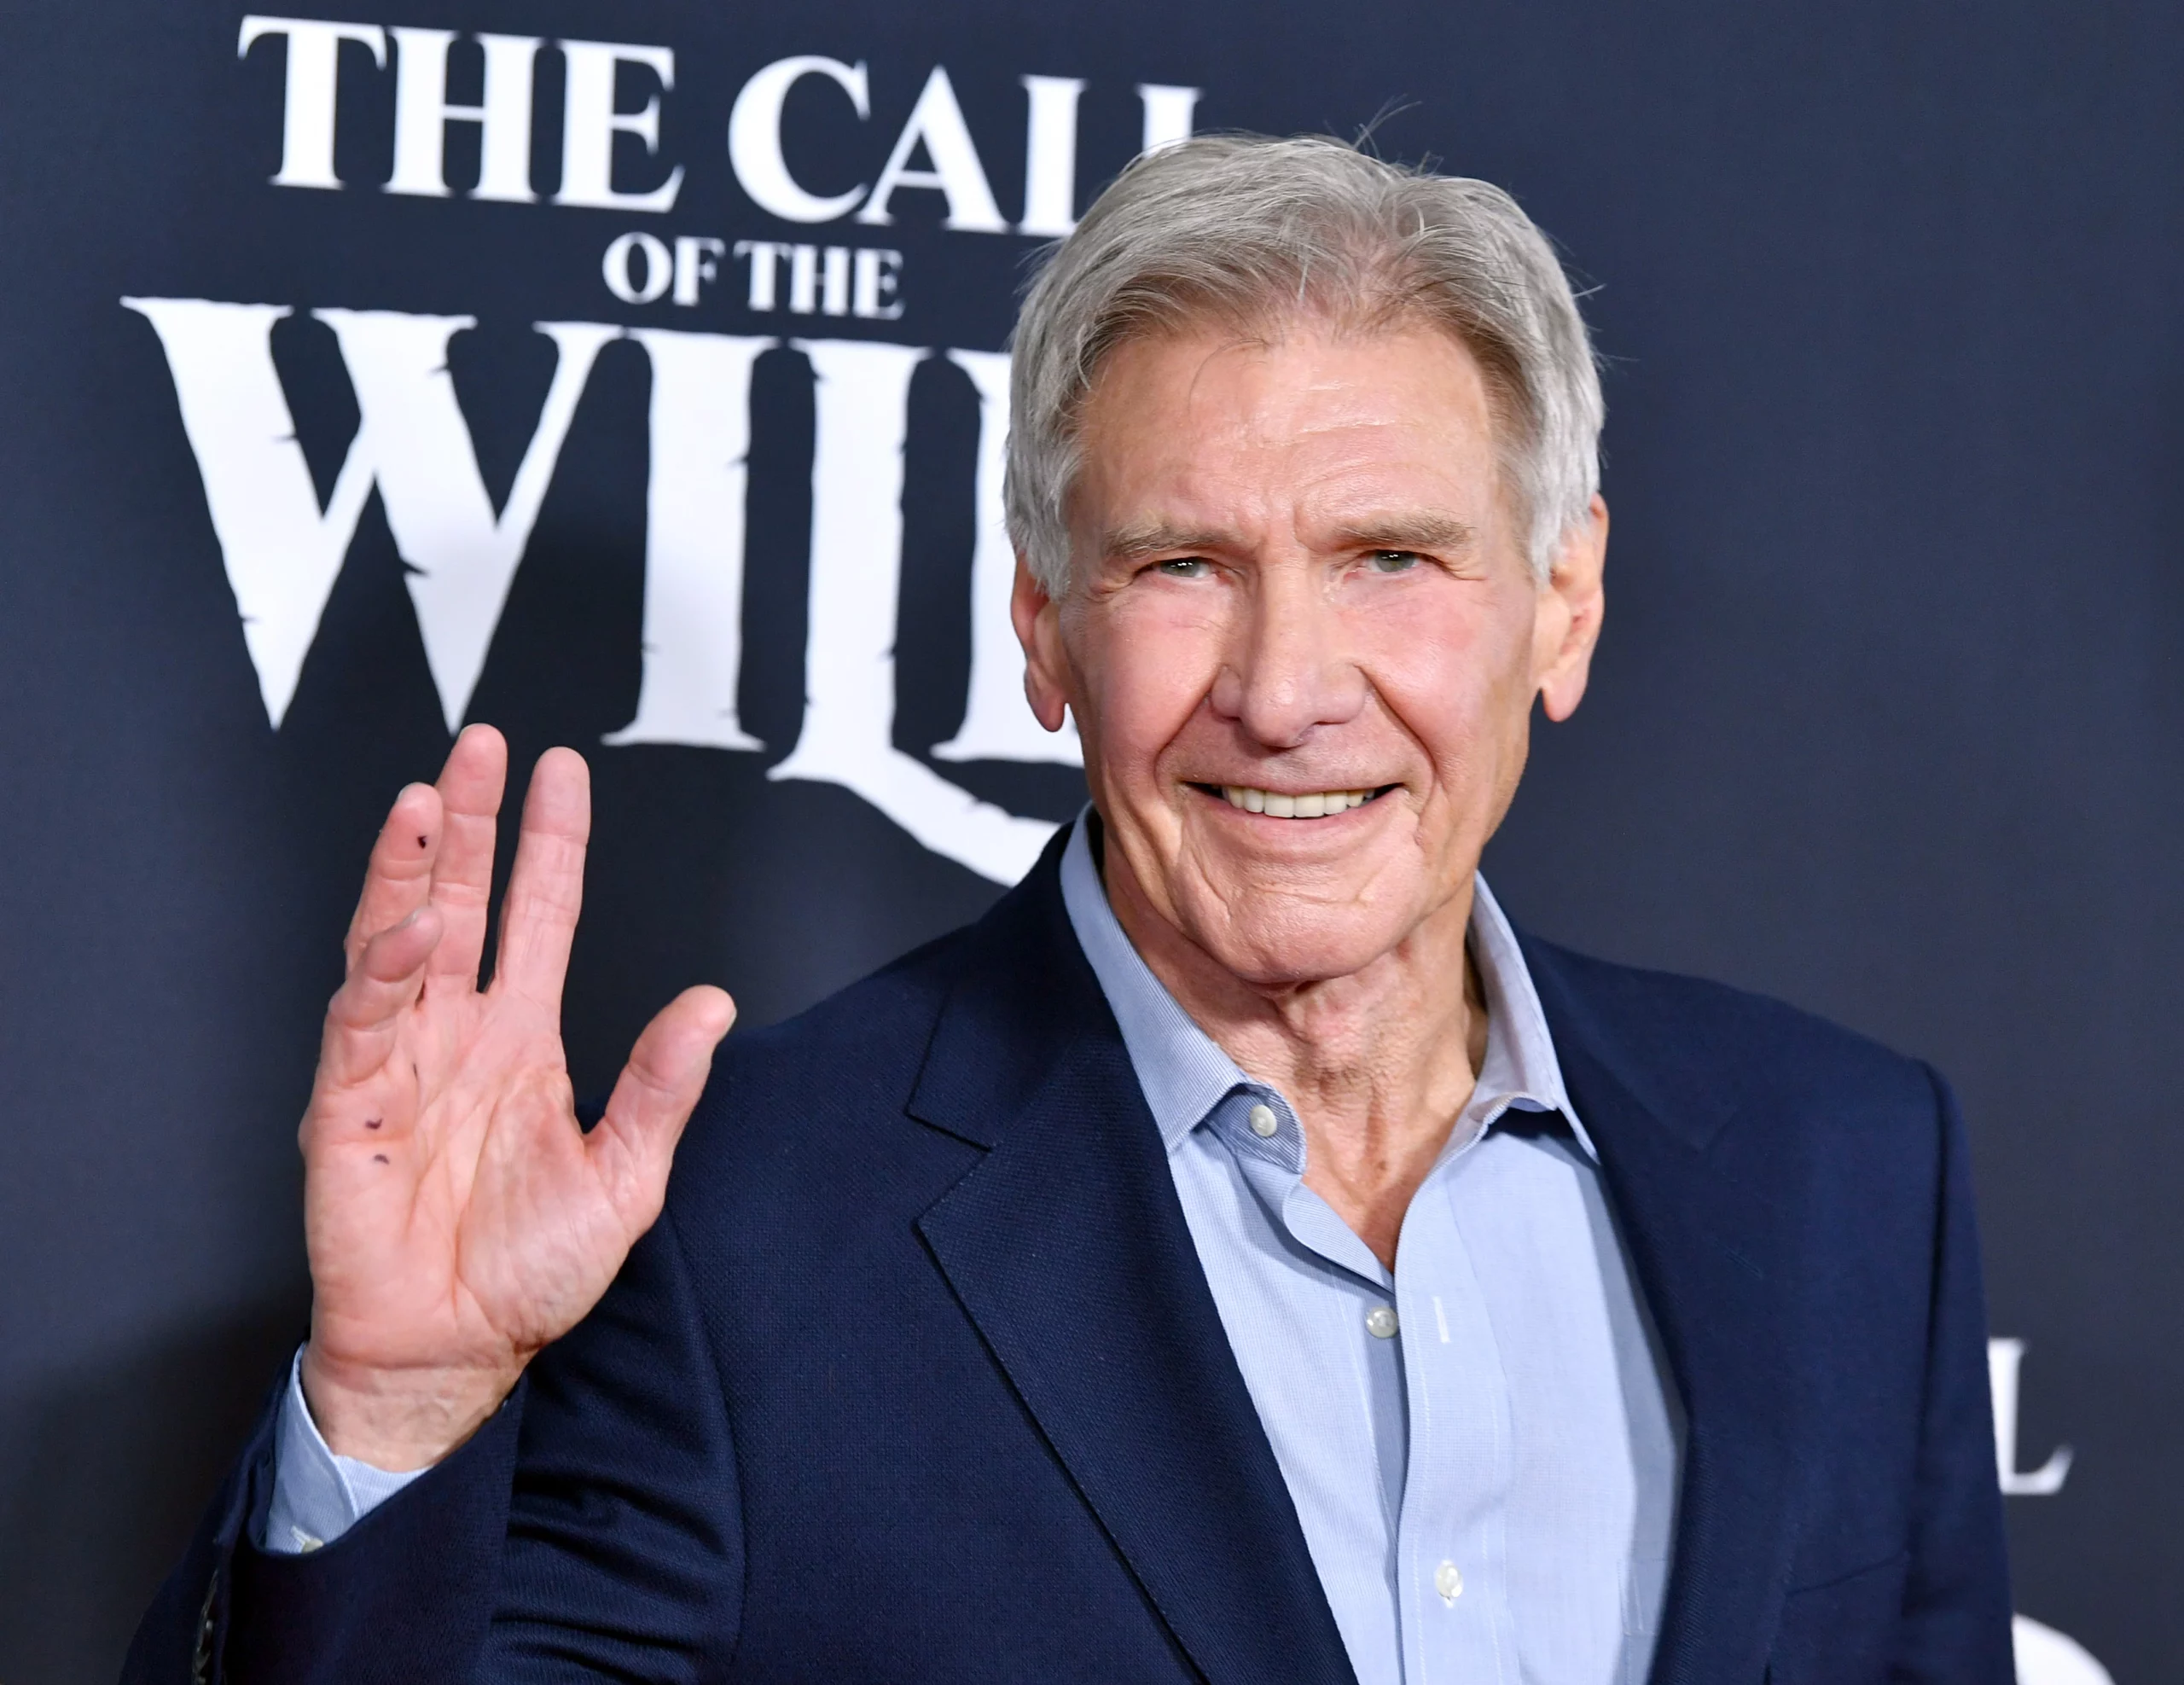 Harrison Ford Net Worth, Income & Salary